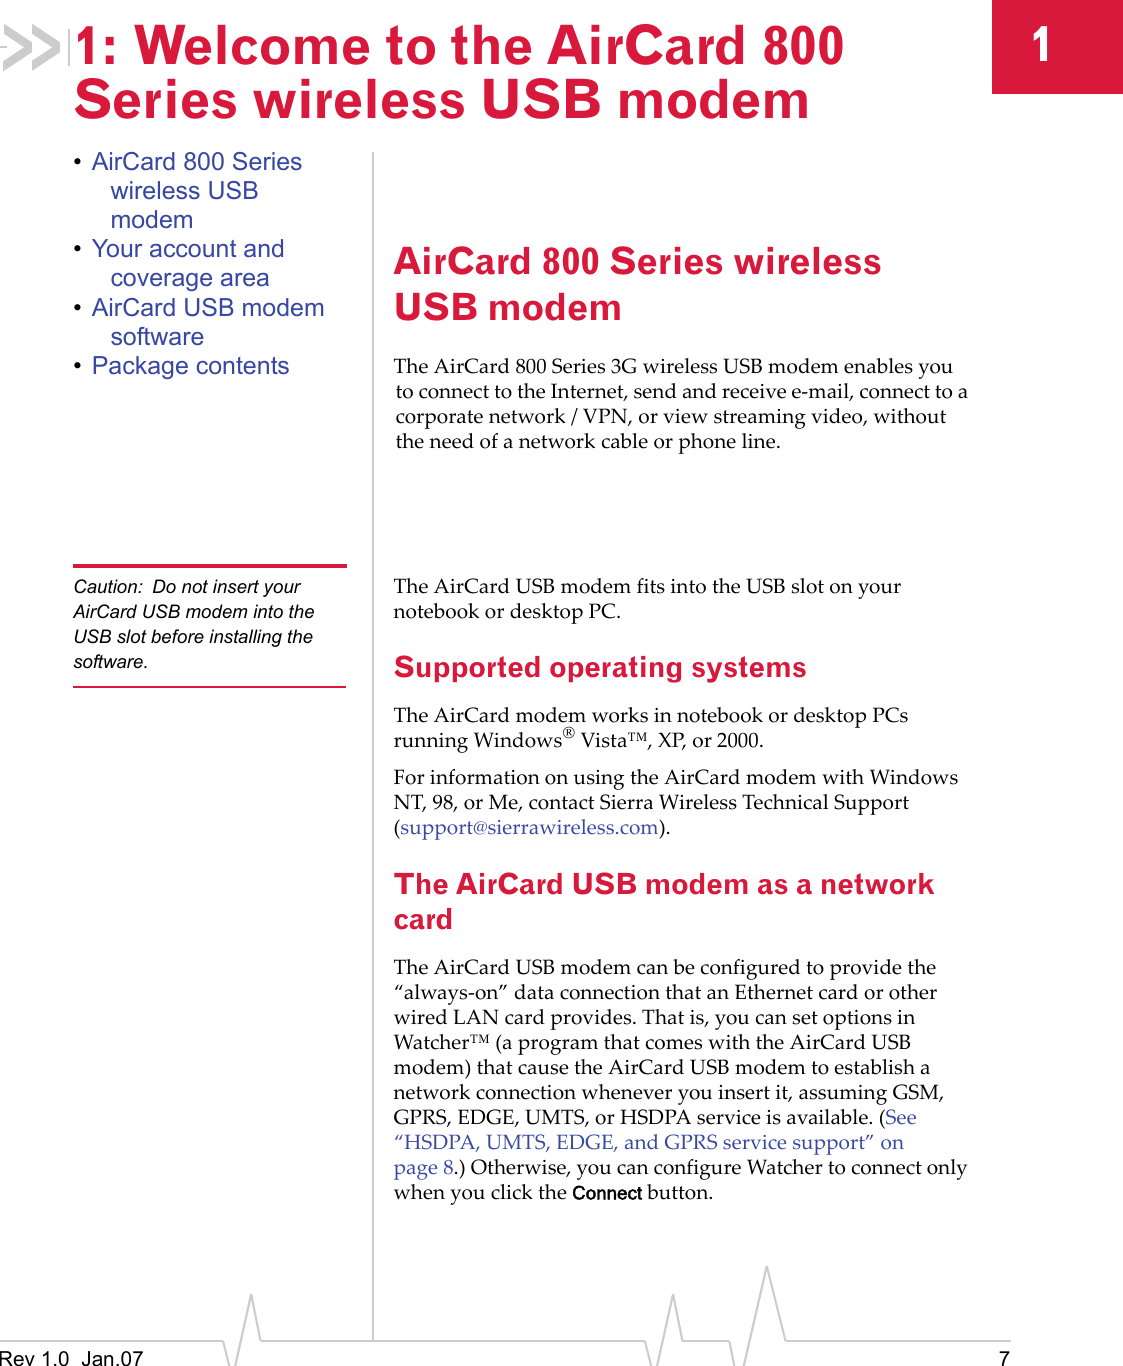 Rev 1.0  Jan.07 711: Welcome to the AirCard 800 Series wireless USB modem•AirCard 800 Series wireless USB modem•Your account and coverage area•AirCard USB modem software•Package contentsAirCard 800 Series wireless USB modemTheAirCard 800Series3GwirelessUSBmodemenablesyoutoconnecttotheInternet,sendandreceivee‐mail,connecttoacorporatenetwork/VPN,orviewstreamingvideo,withouttheneedofanetworkcableorphoneline.Caution: Do not insert your AirCard USB modem into the USB slot before installing the software.TheAirCardUSBmodemfitsintotheUSBslotonyournotebookordesktopPC.Supported operating systemsTheAirCardmodemworksinnotebookordesktopPCsrunningWindows®Vista™,XP,or2000.ForinformationonusingtheAirCardmodemwithWindowsNT,98,orMe,contactSierraWirelessTechnicalSupport(support@sierrawireless.com).The AirCard USB modem as a network cardTheAirCardUSBmodemcanbeconfiguredtoprovidethe“always‐on”dataconnectionthatanEthernetcardorotherwiredLANcardprovides.Thatis,youcansetoptionsinWatcher™(aprogramthatcomeswiththeAirCardUSBmodem)thatcausetheAirCardUSBmodemtoestablishanetworkconnectionwheneveryouinsertit,assumingGSM,GPRS,EDGE,UMTS,orHSDPAserviceisavailable.(See“HSDPA,UMTS,EDGE,andGPRSservicesupport”onpage 8.)Otherwise,youcanconfigureWatchertoconnectonlywhenyouclicktheConnectbutton.